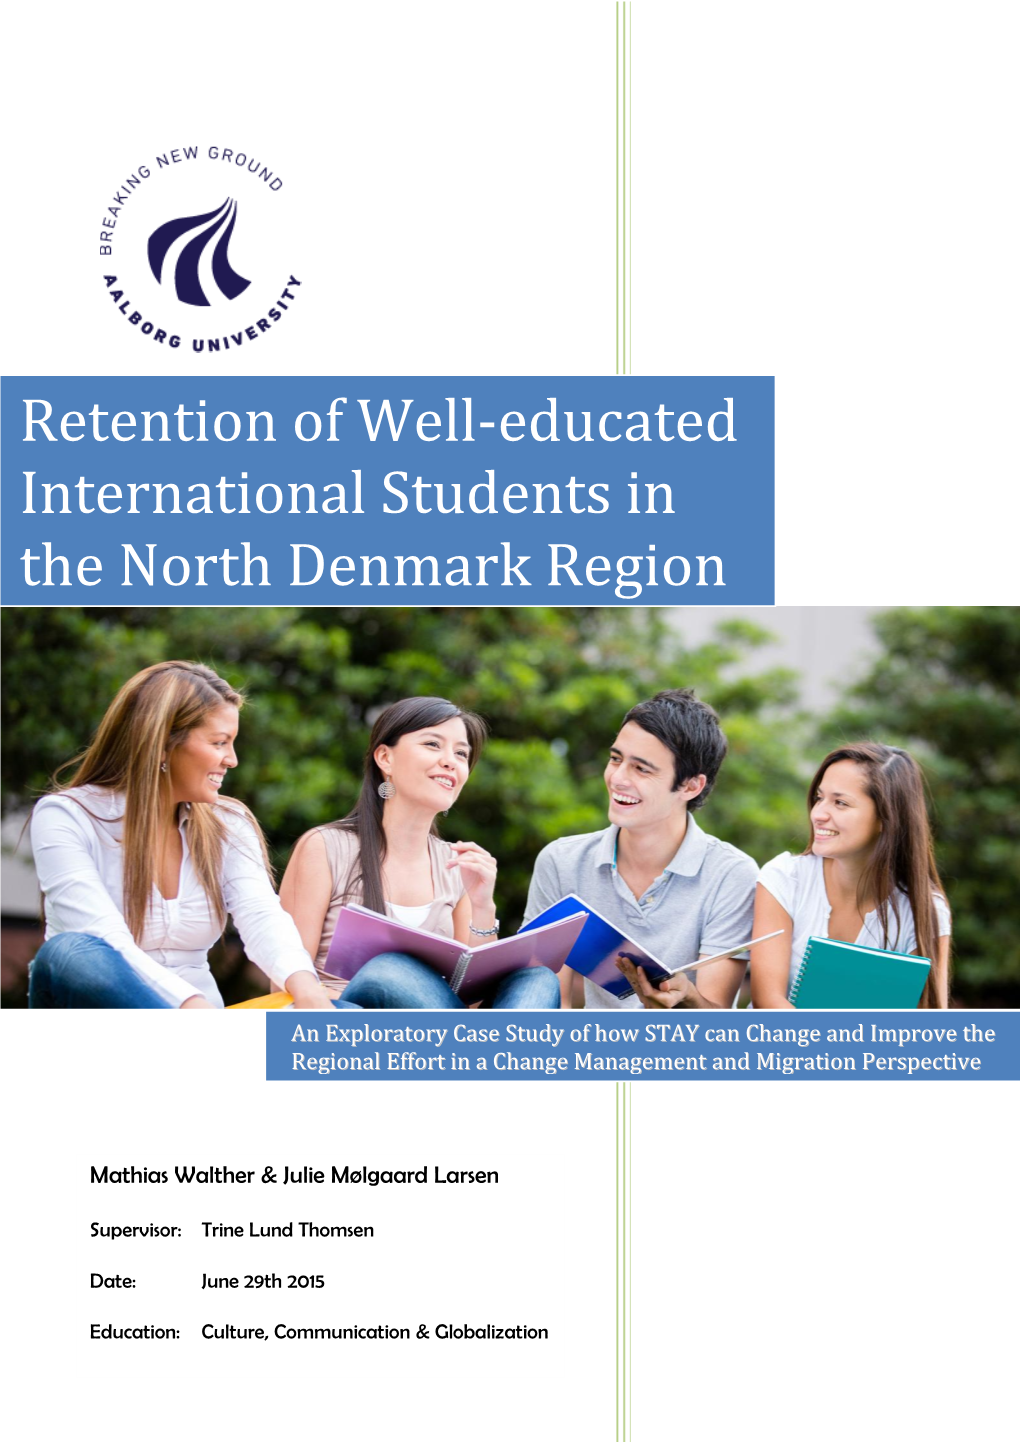 Retention of Well-Educated International Students in the North Denmark Region